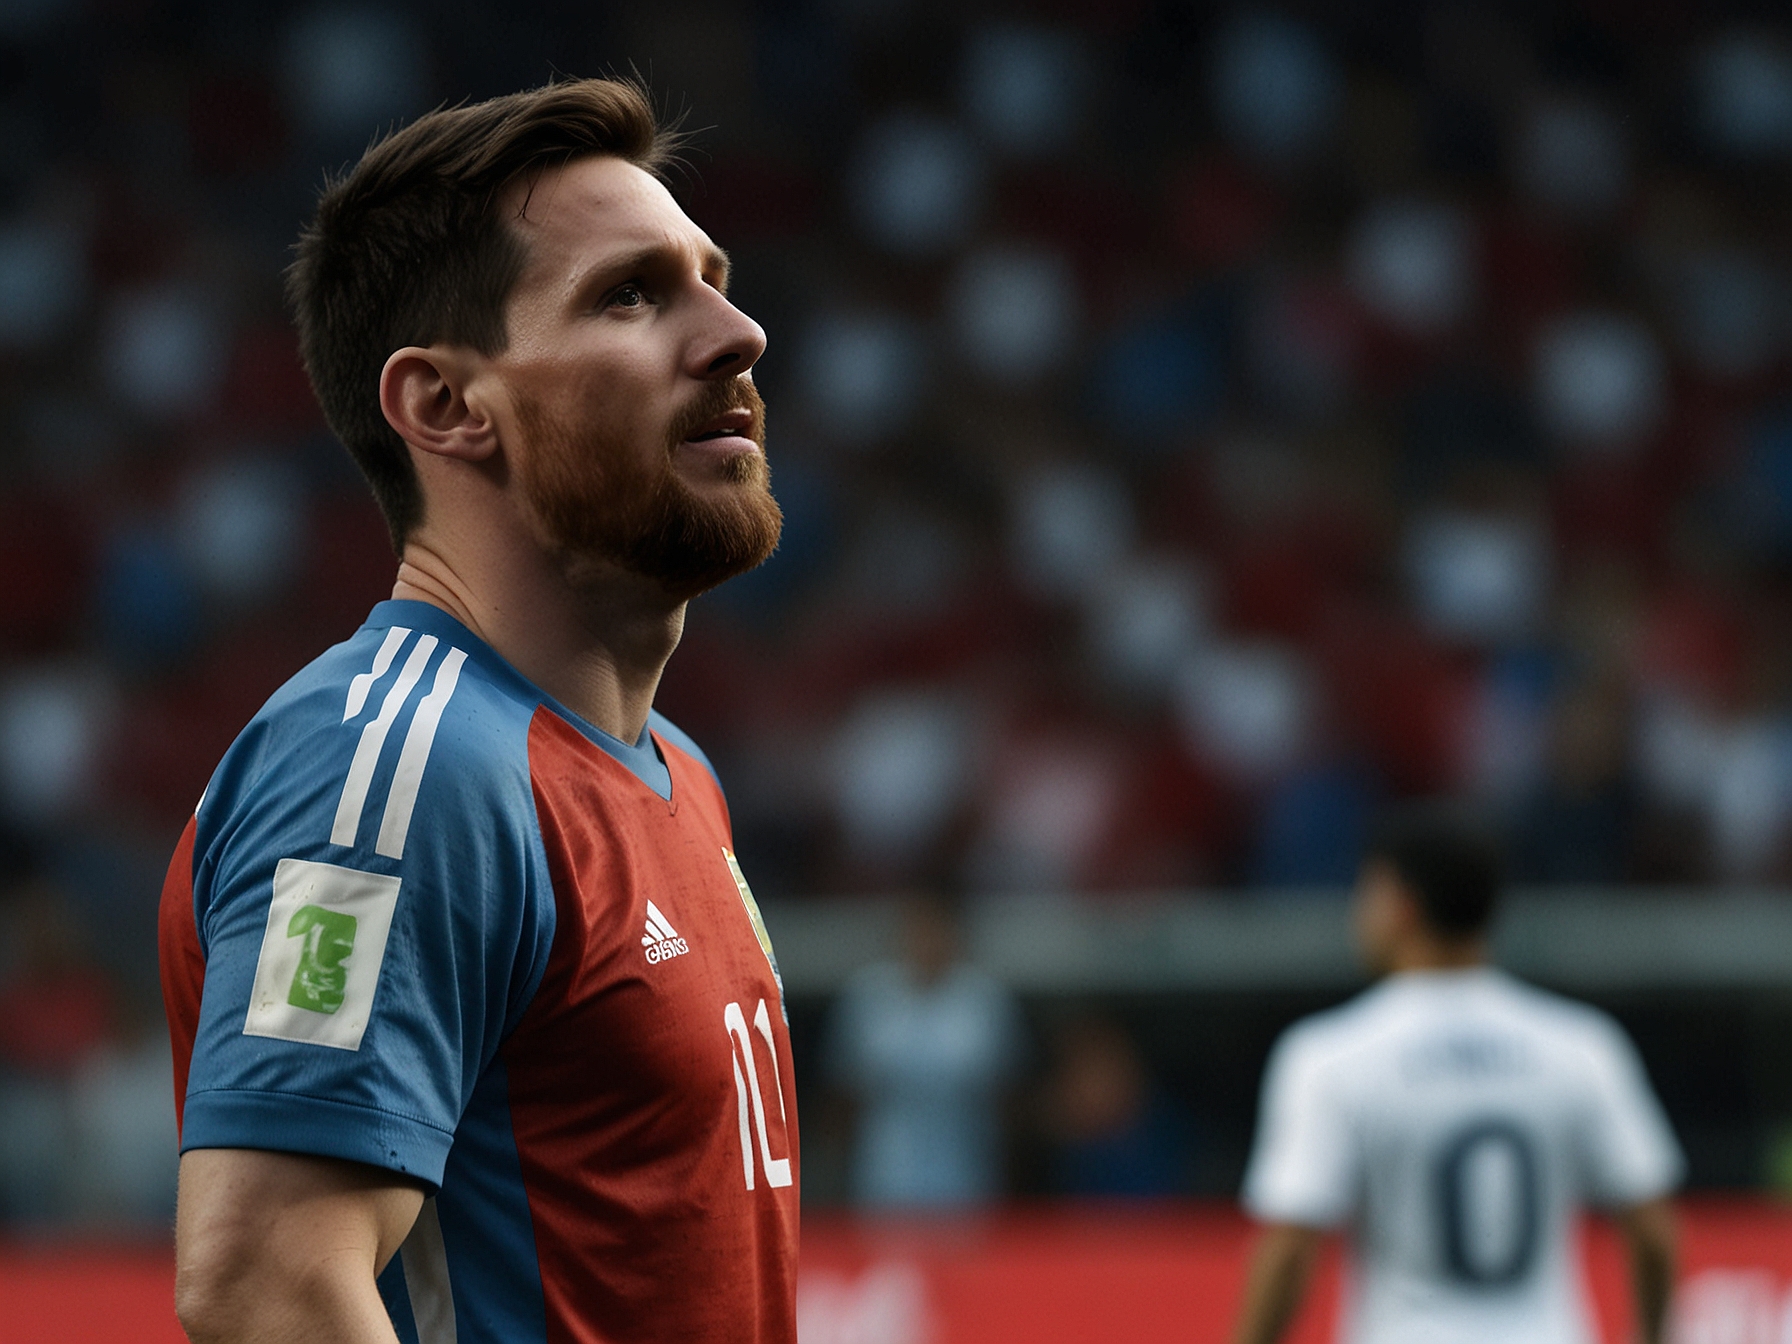 Lionel Messi stands in disbelief after missing a scoring opportunity in the first half against Canada in Copa America 2024, as fans express concern about his current form.